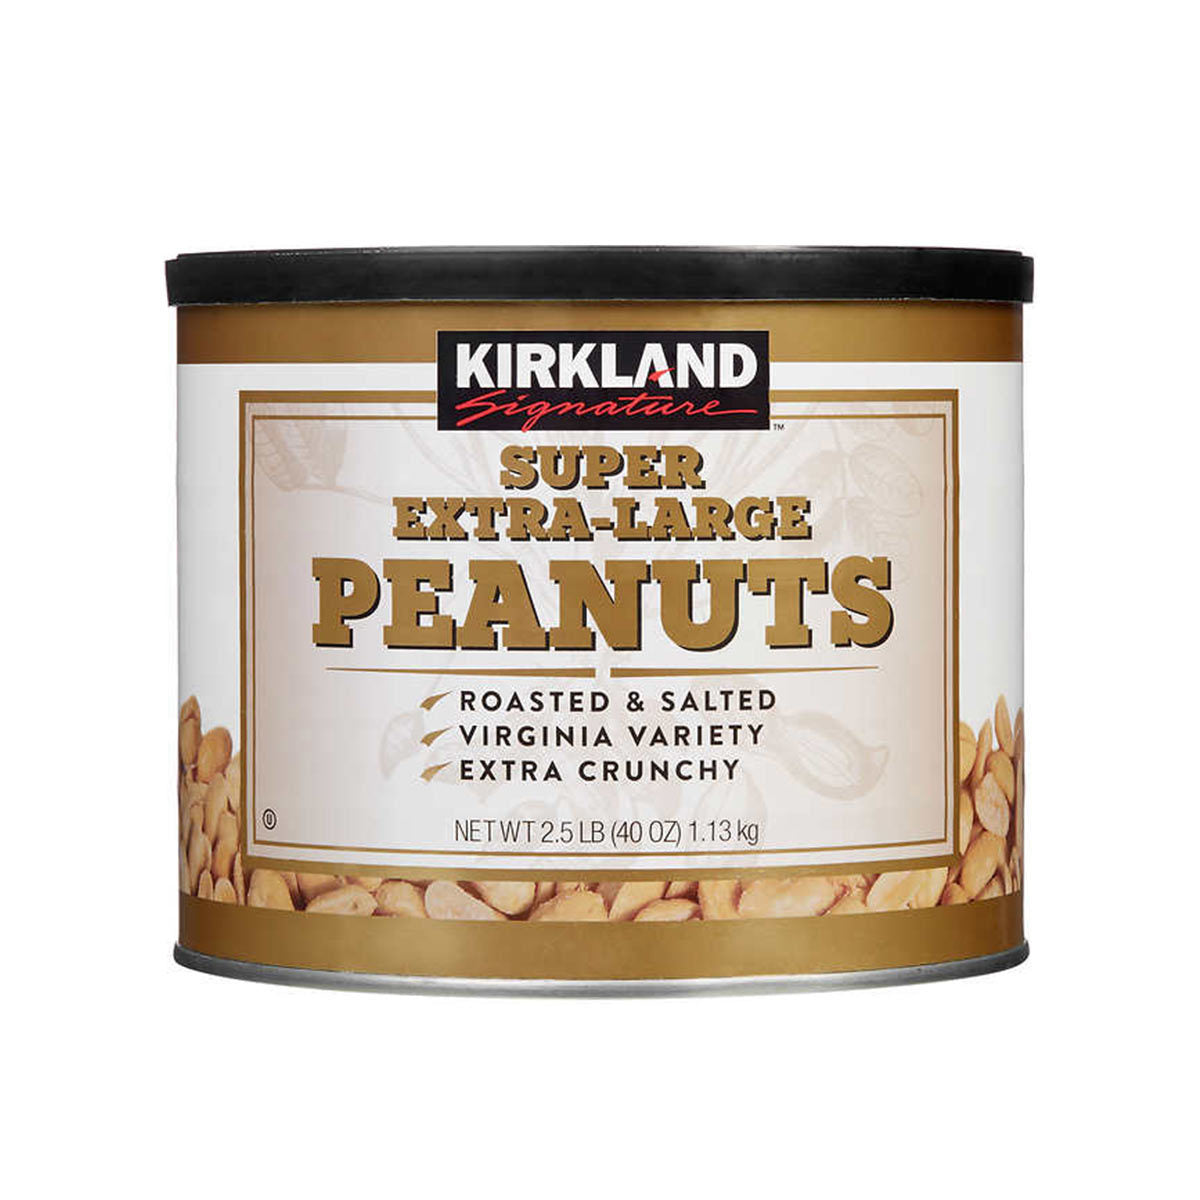 Kirkland Signature Super Extra-Large Roasted & Salted Peanuts 1.13kg - Nutty Delight for Snacking Bliss